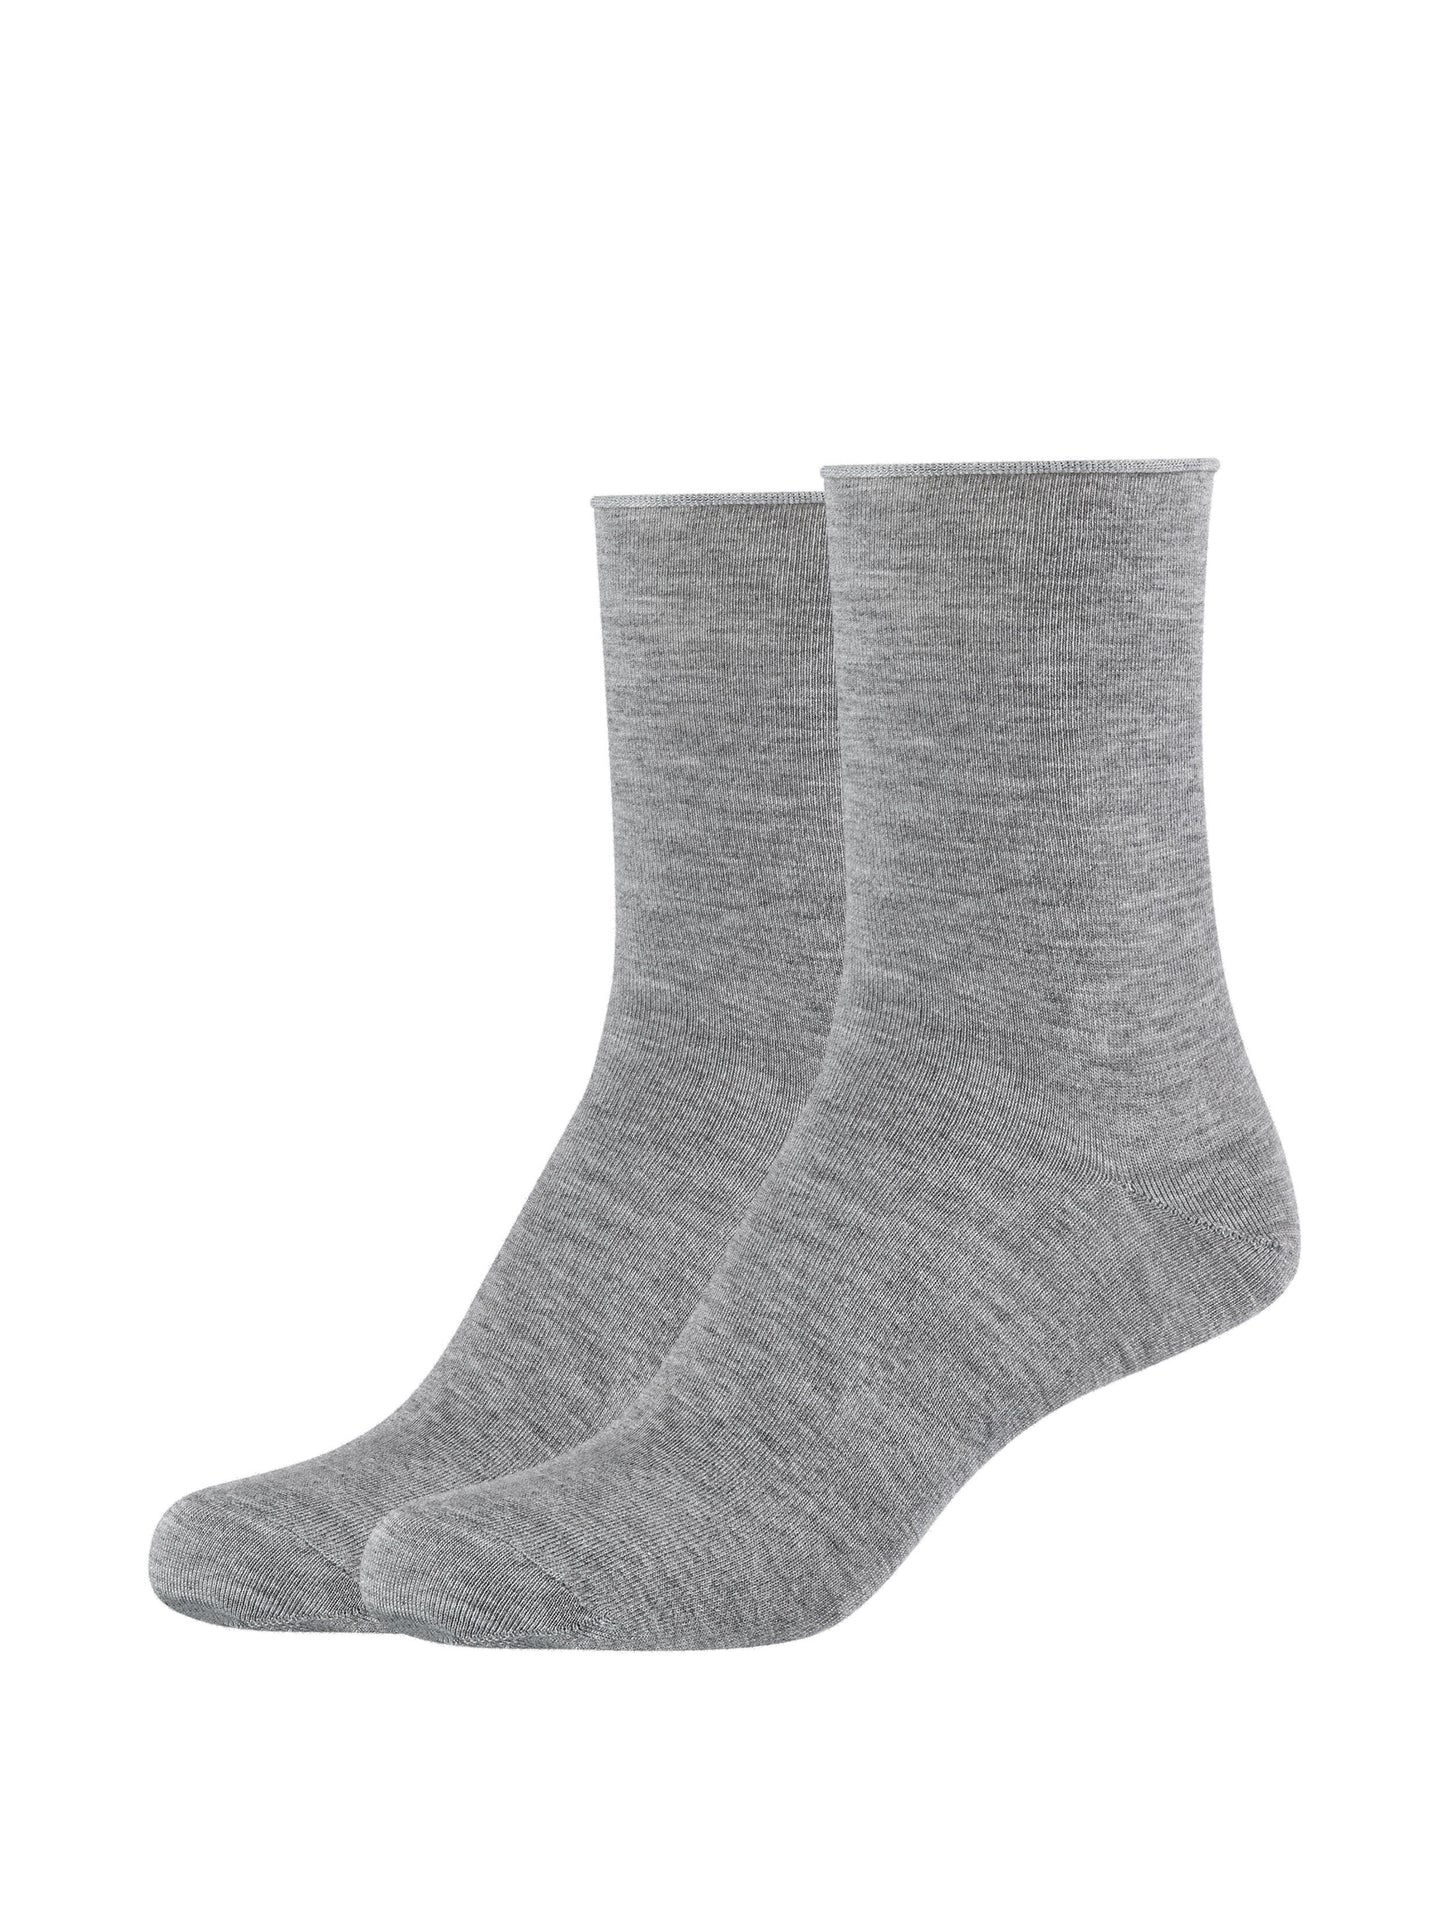 Women silky touch sustainable Socks 2p